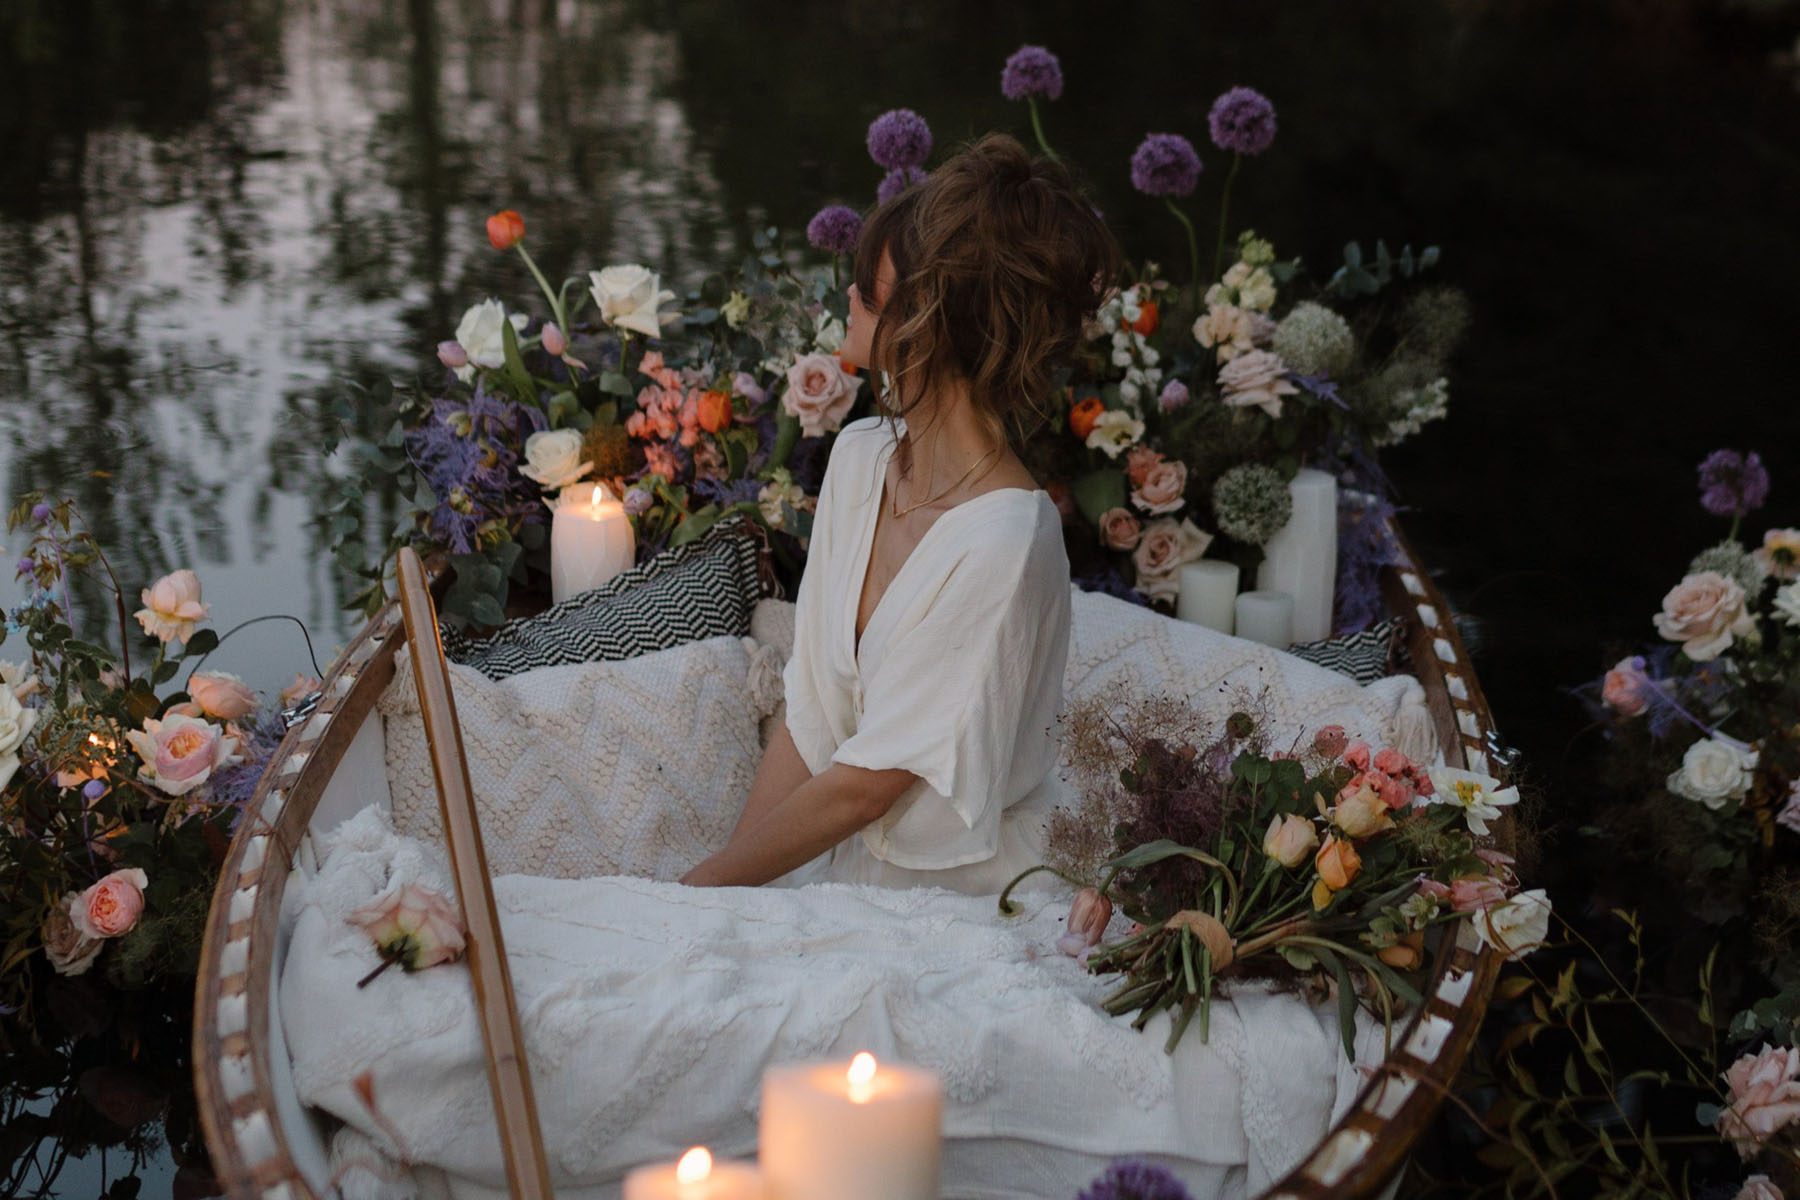 Candlelit florals surrounding woman in a canoe amongst pillows.